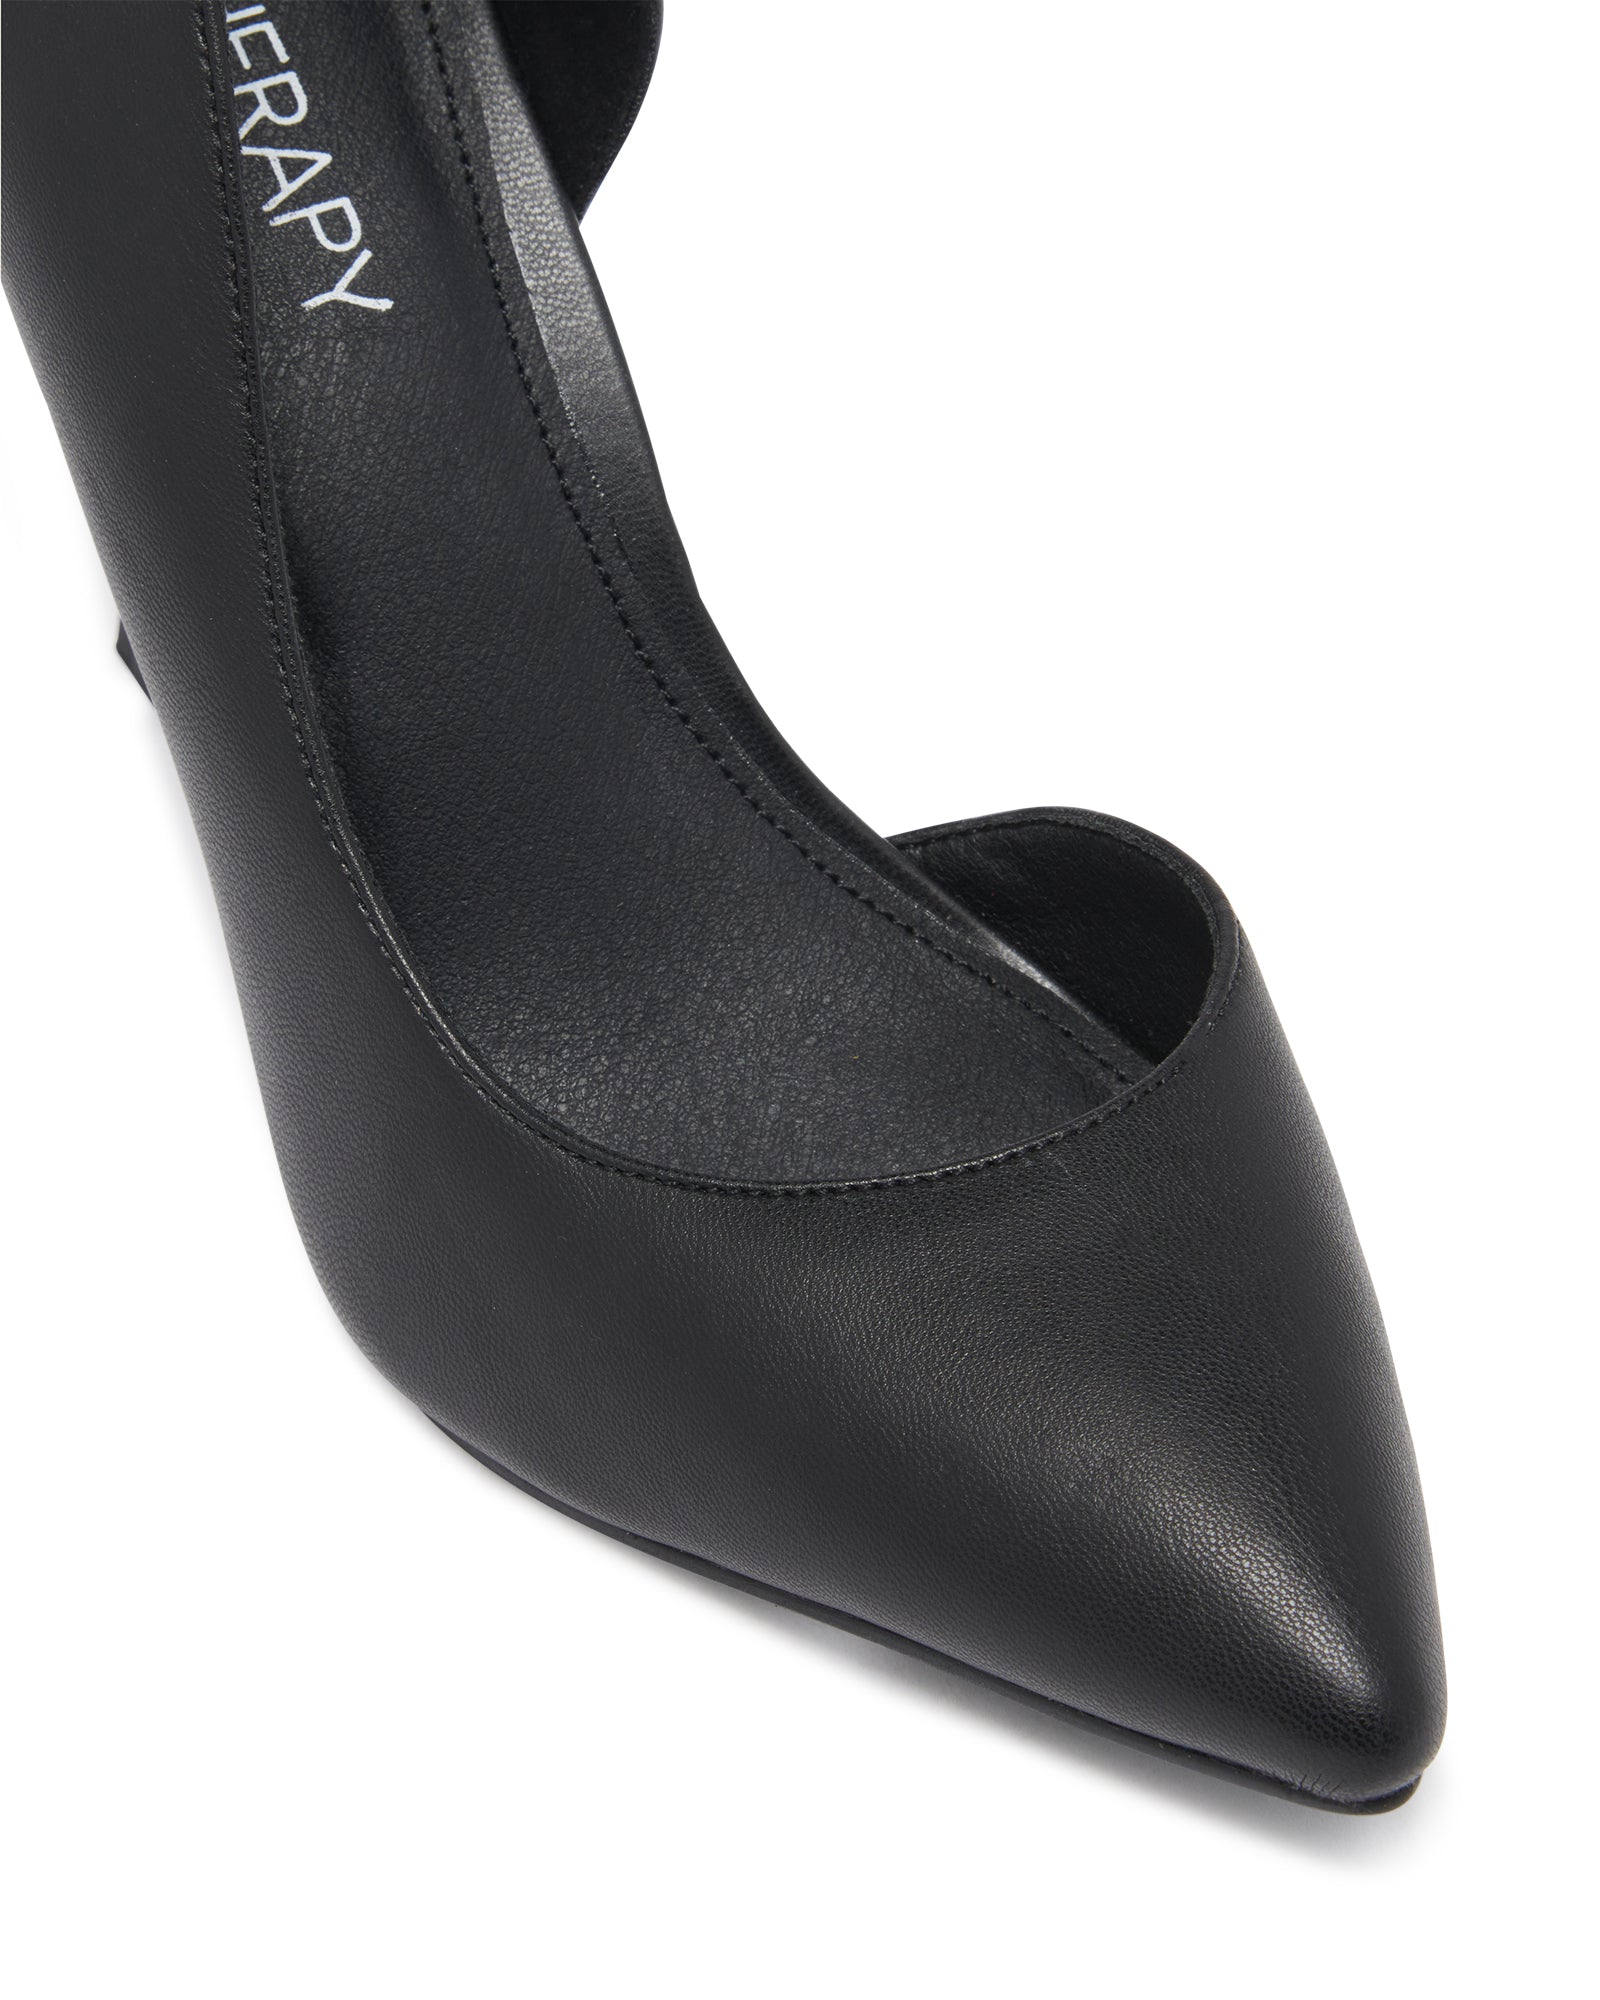 Comfortable and Elegant Shoe for Women | Louise M Shoes